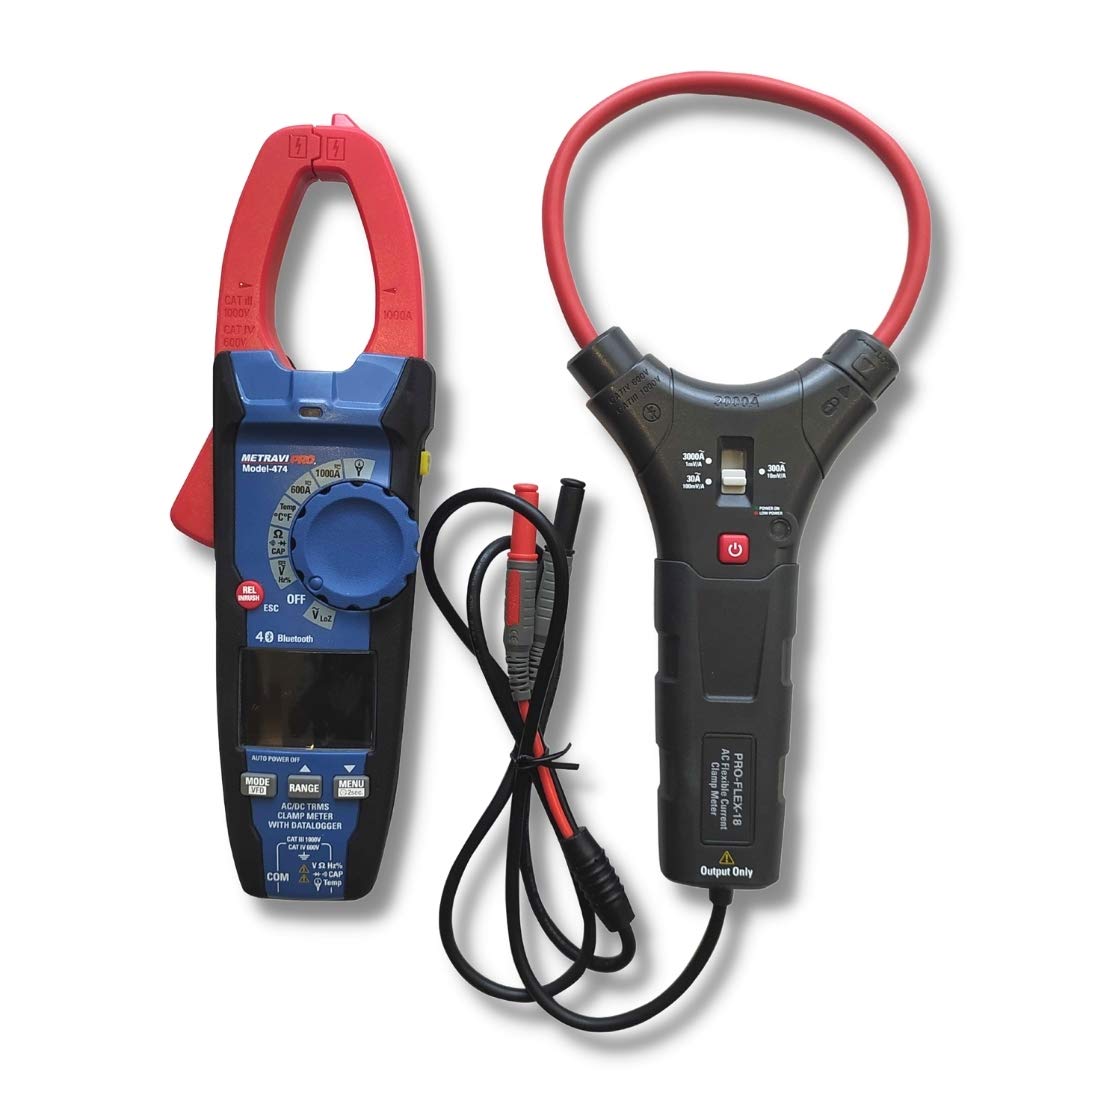 Metravi PRO 474 Fully-protected AC T-RMS/DC Digital Clamp Meter with Bluetooth, Datalogging, Trend Capture & Flexible Clamp